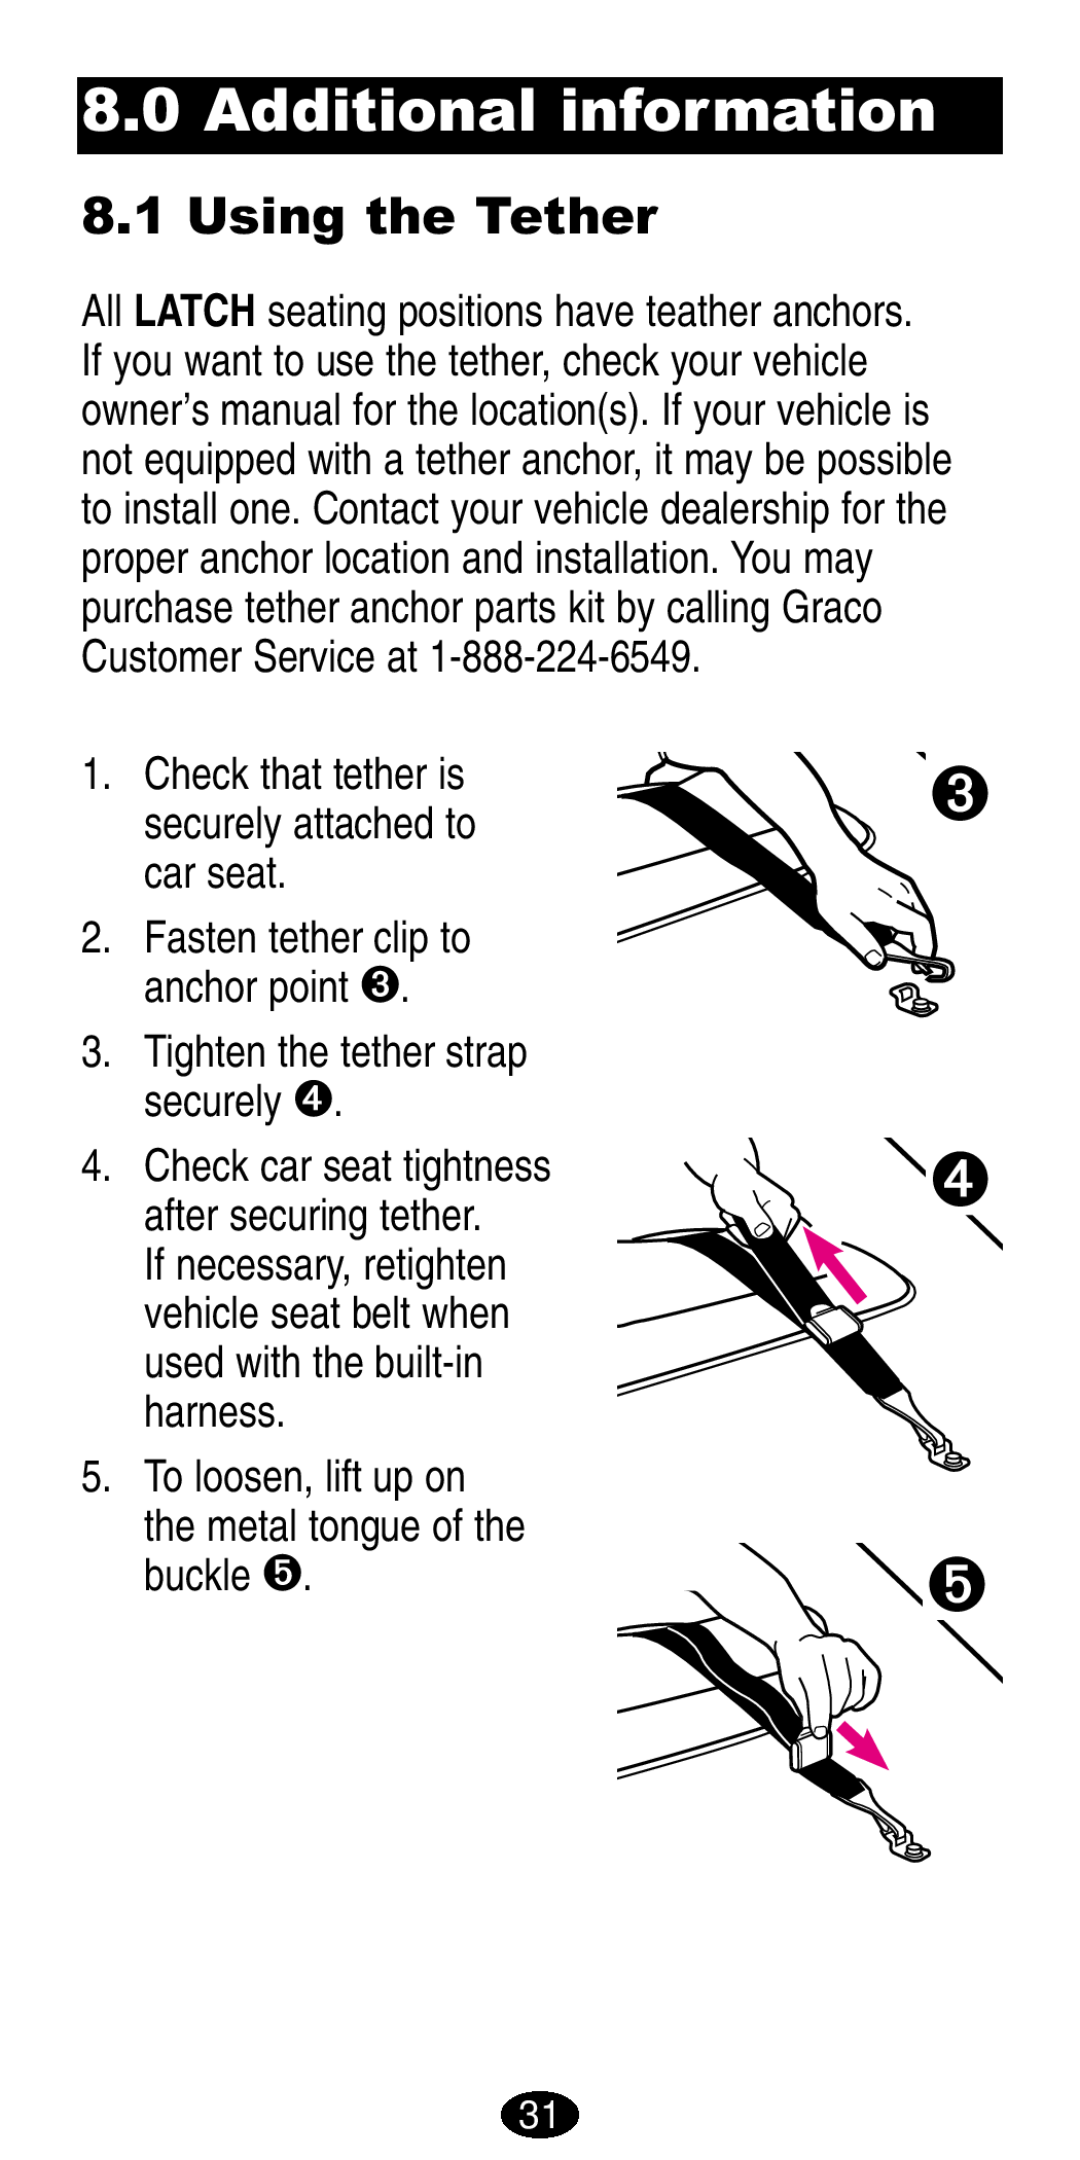 Graco 8486 Additional information, Using the Tether, Tighten the tether strap securely, Fasten tether clip to anchor point 